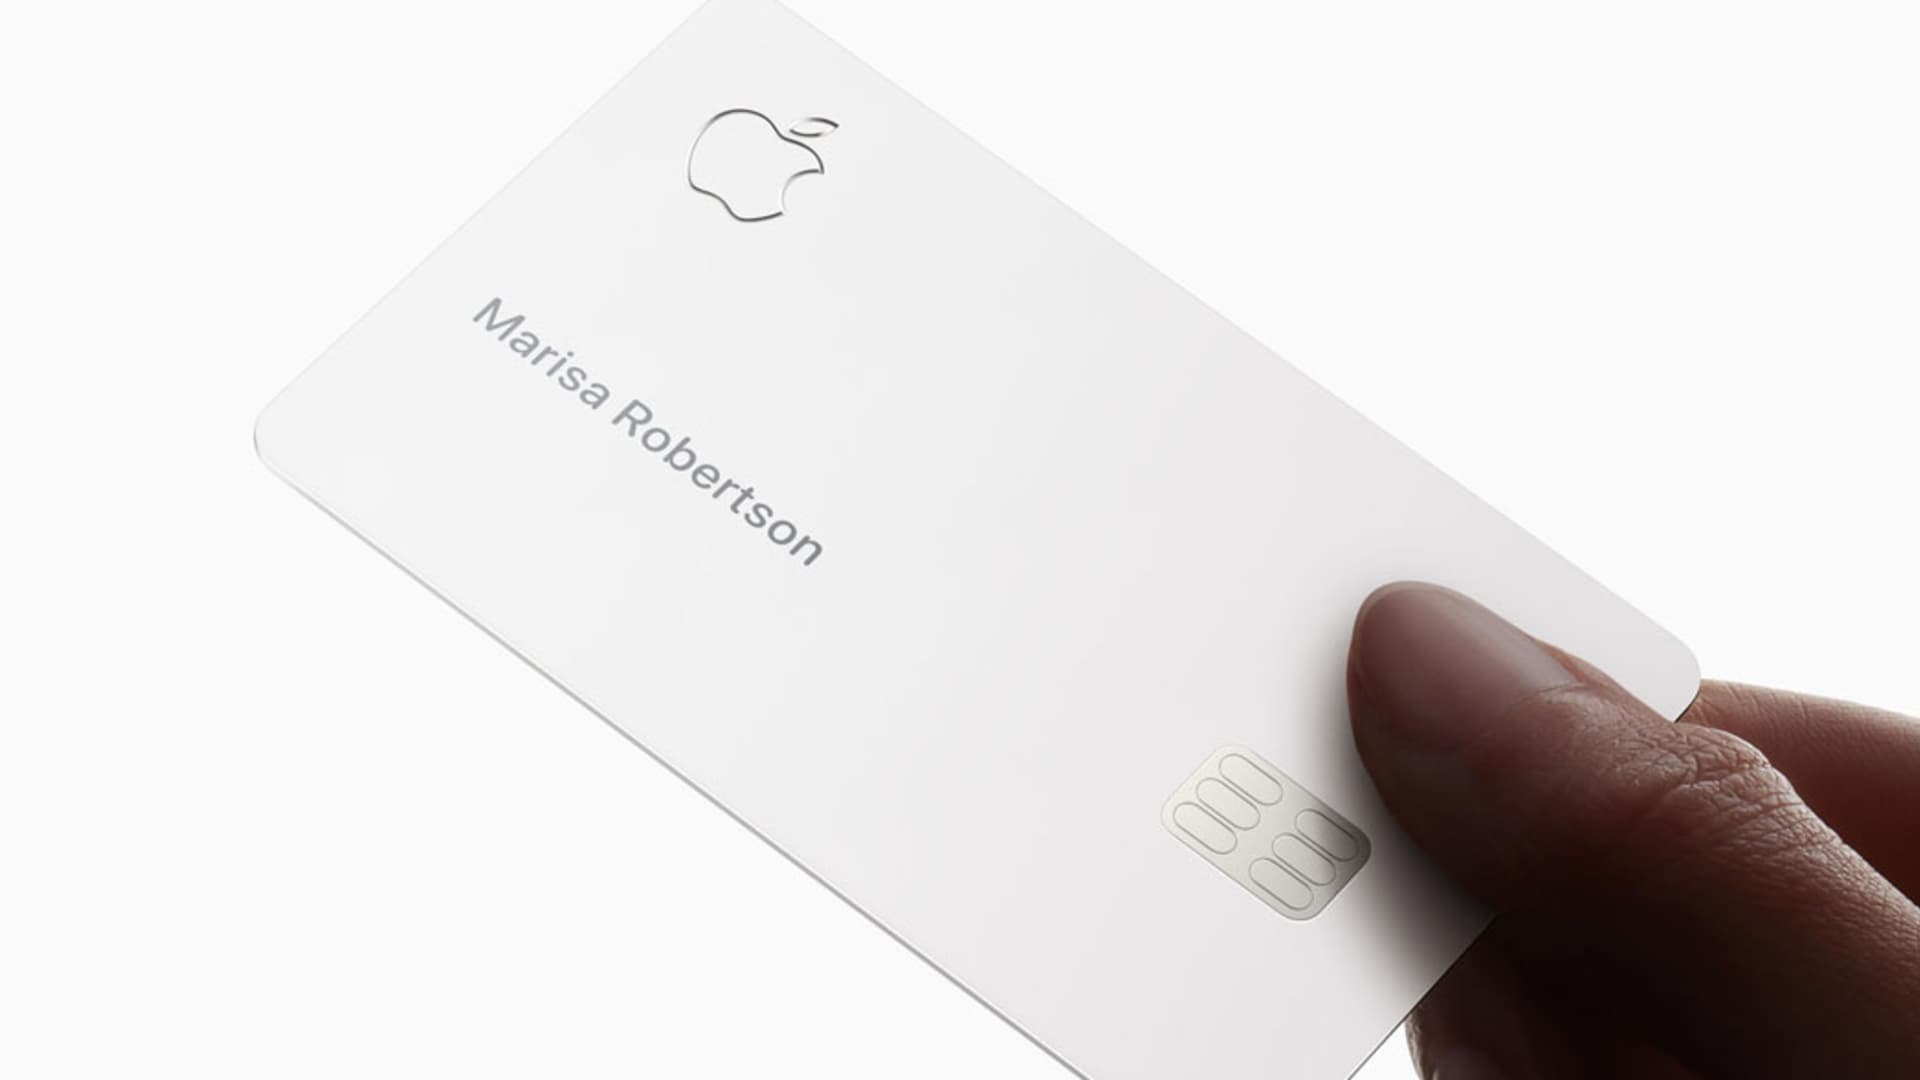 What credit score do you need to get the Apple Card?